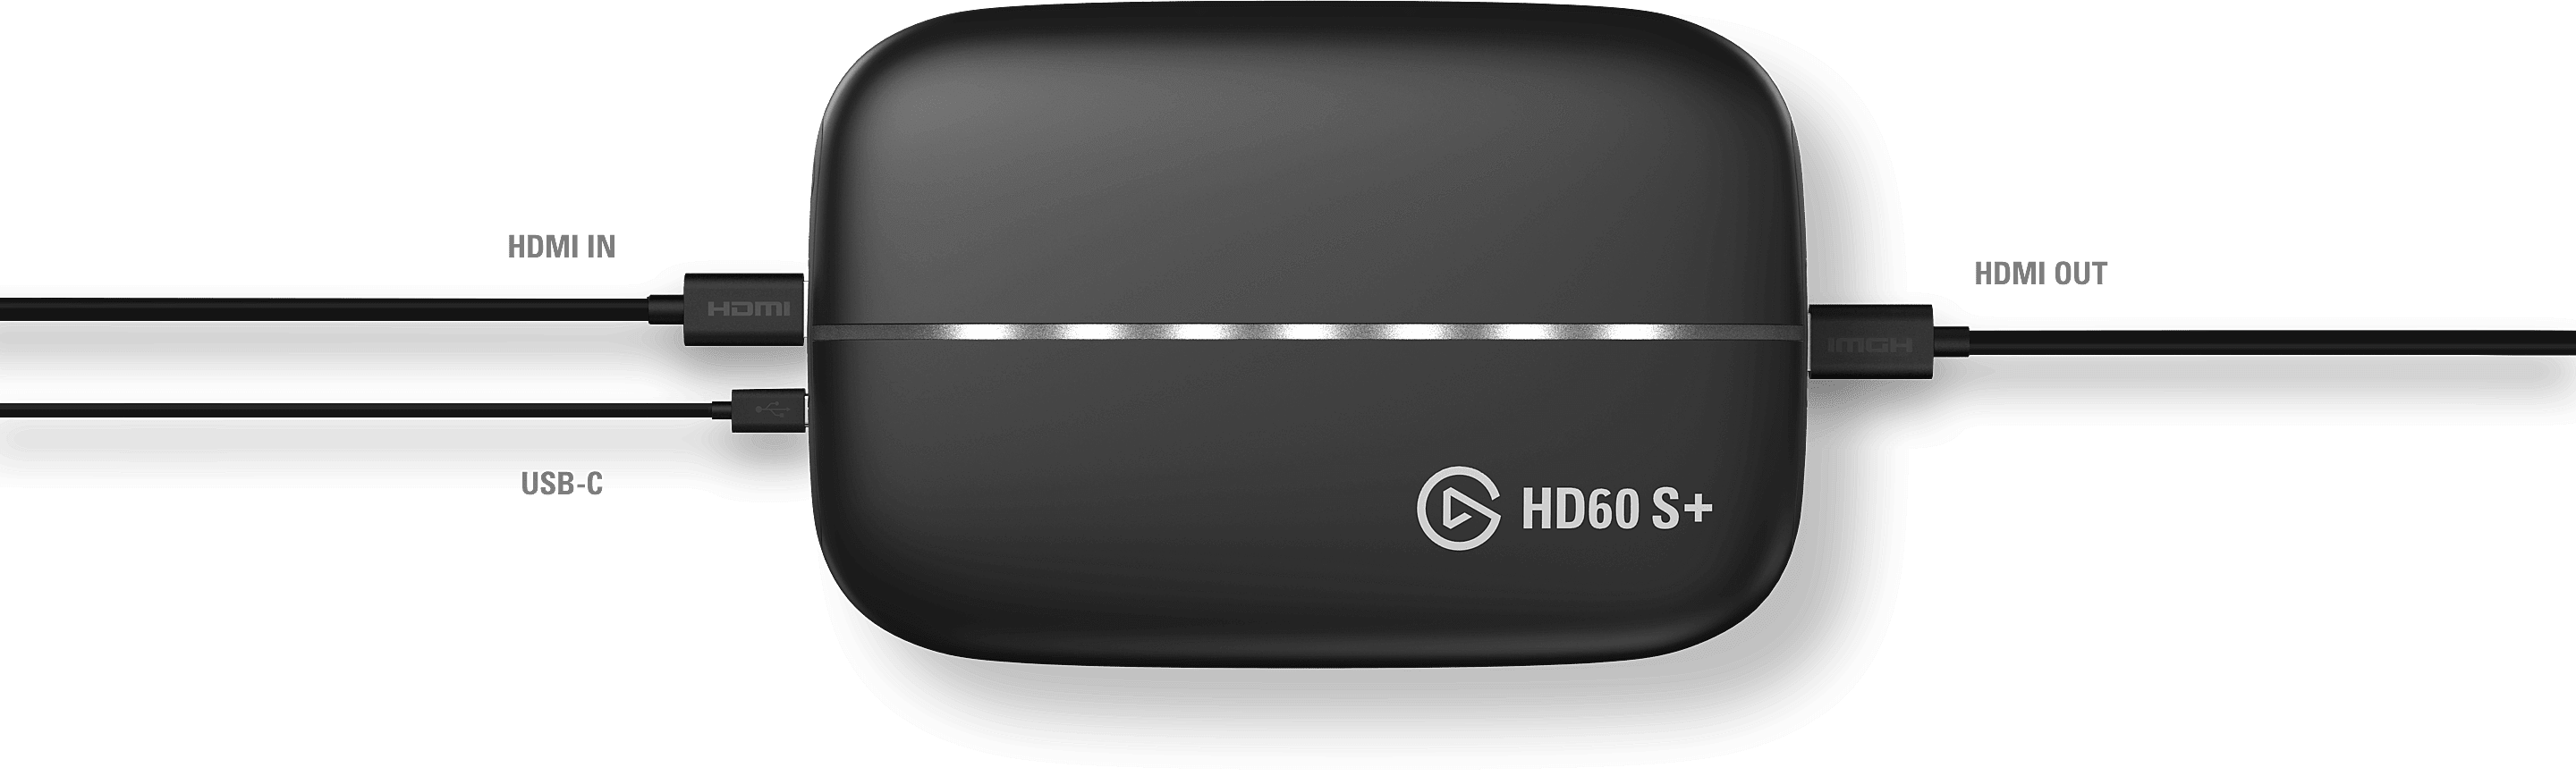 Elgato HD60S+ Review: Compelling Console Capture